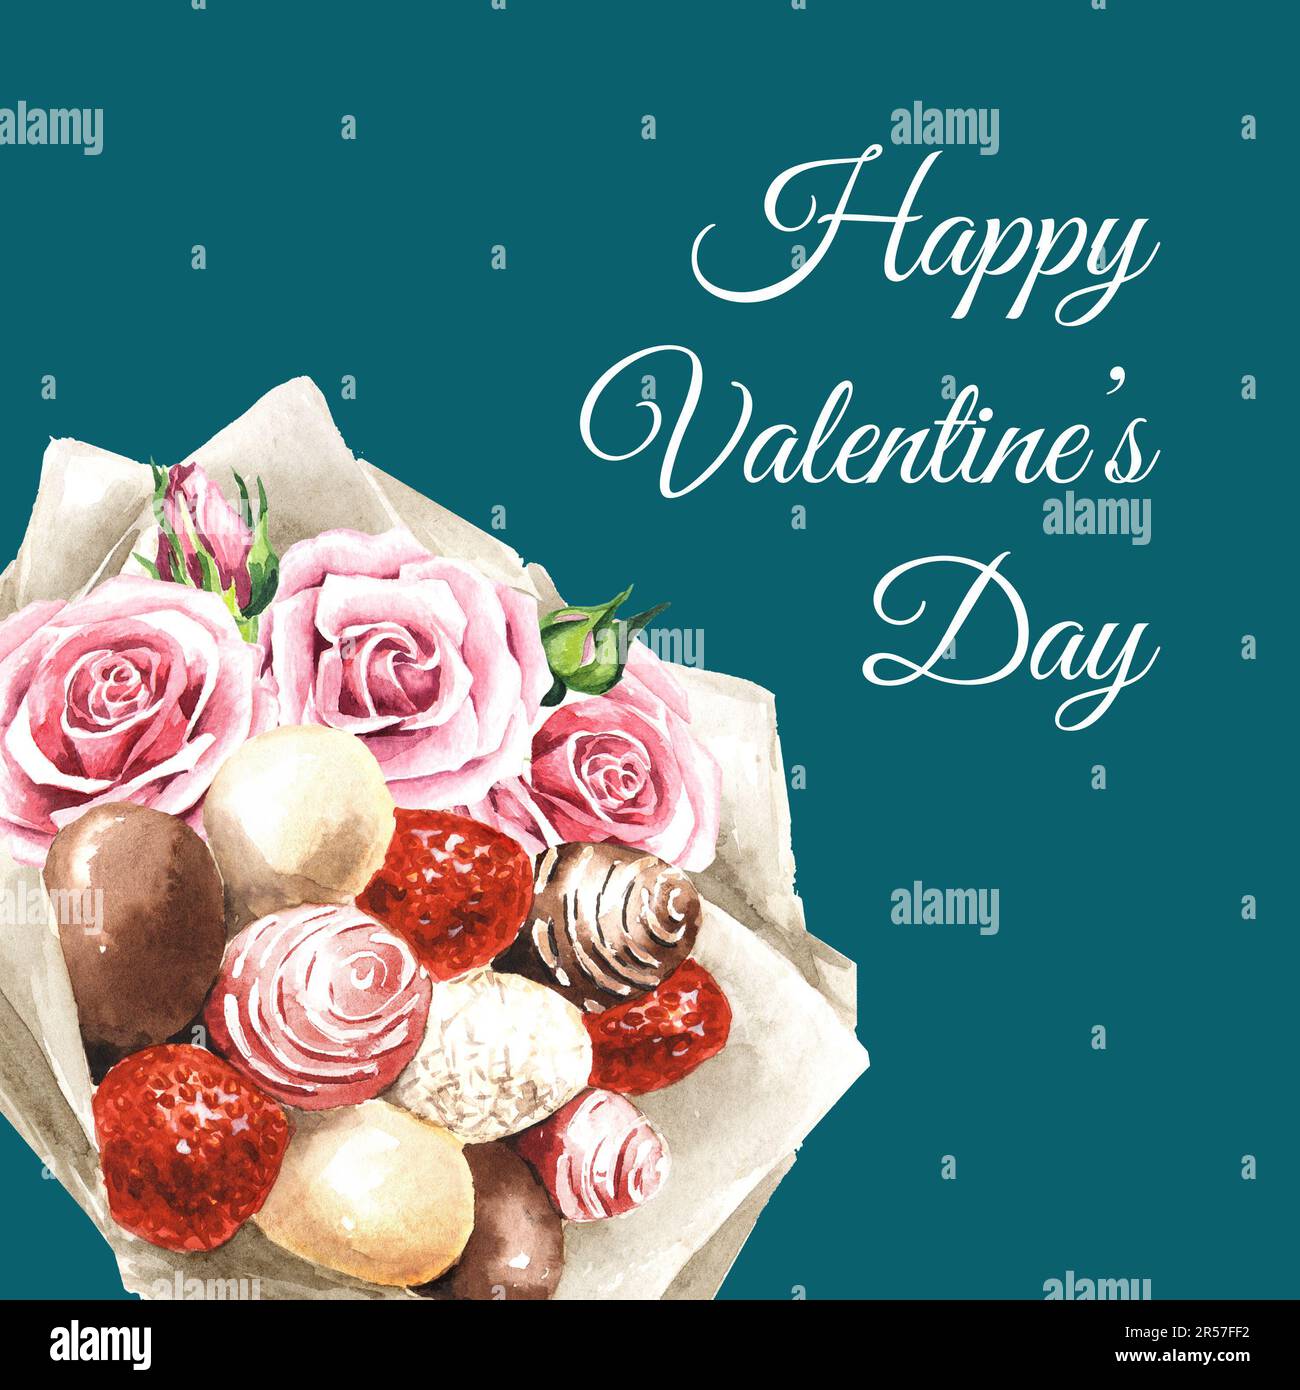 Sweet edible bouquet, giant strawberries in glaze dipped in chocolate, and pink rose flowers. Happy Valentine's Day card. Hand drawn watercolor illust Stock Photo